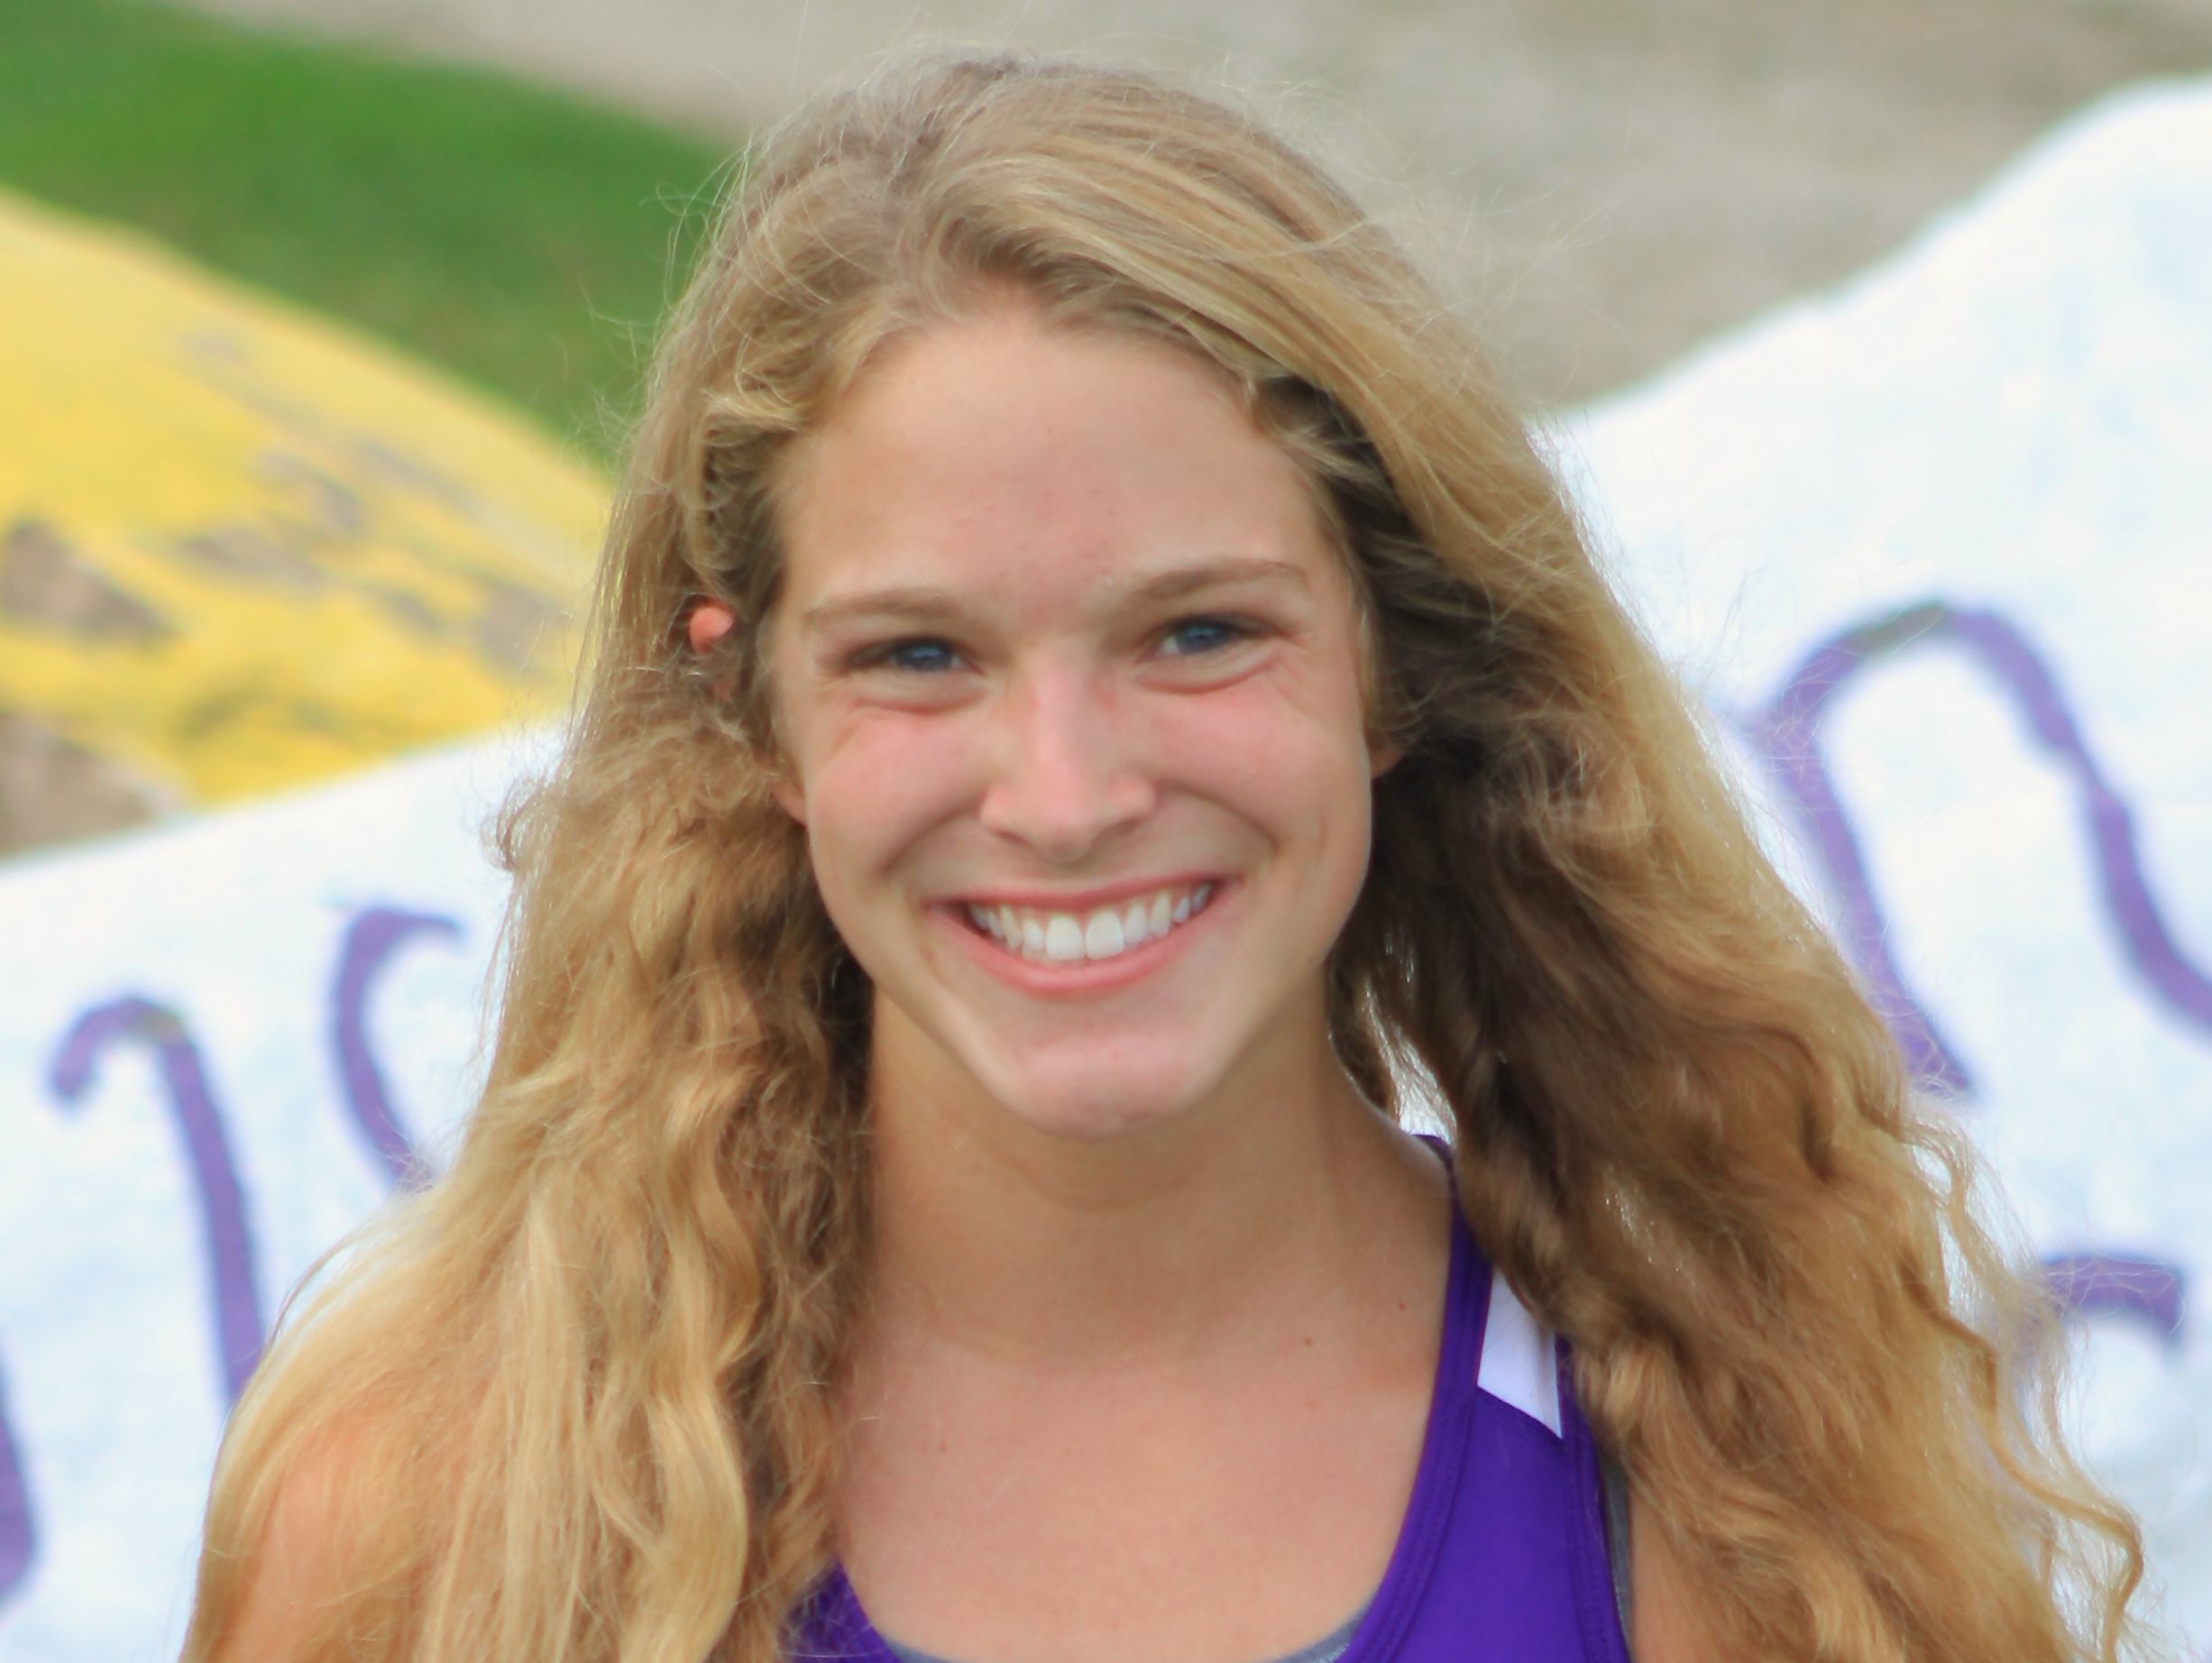 Megan Slamkowski has been Guerin Catholic's top runner during a record-breaking season for the Eagles.